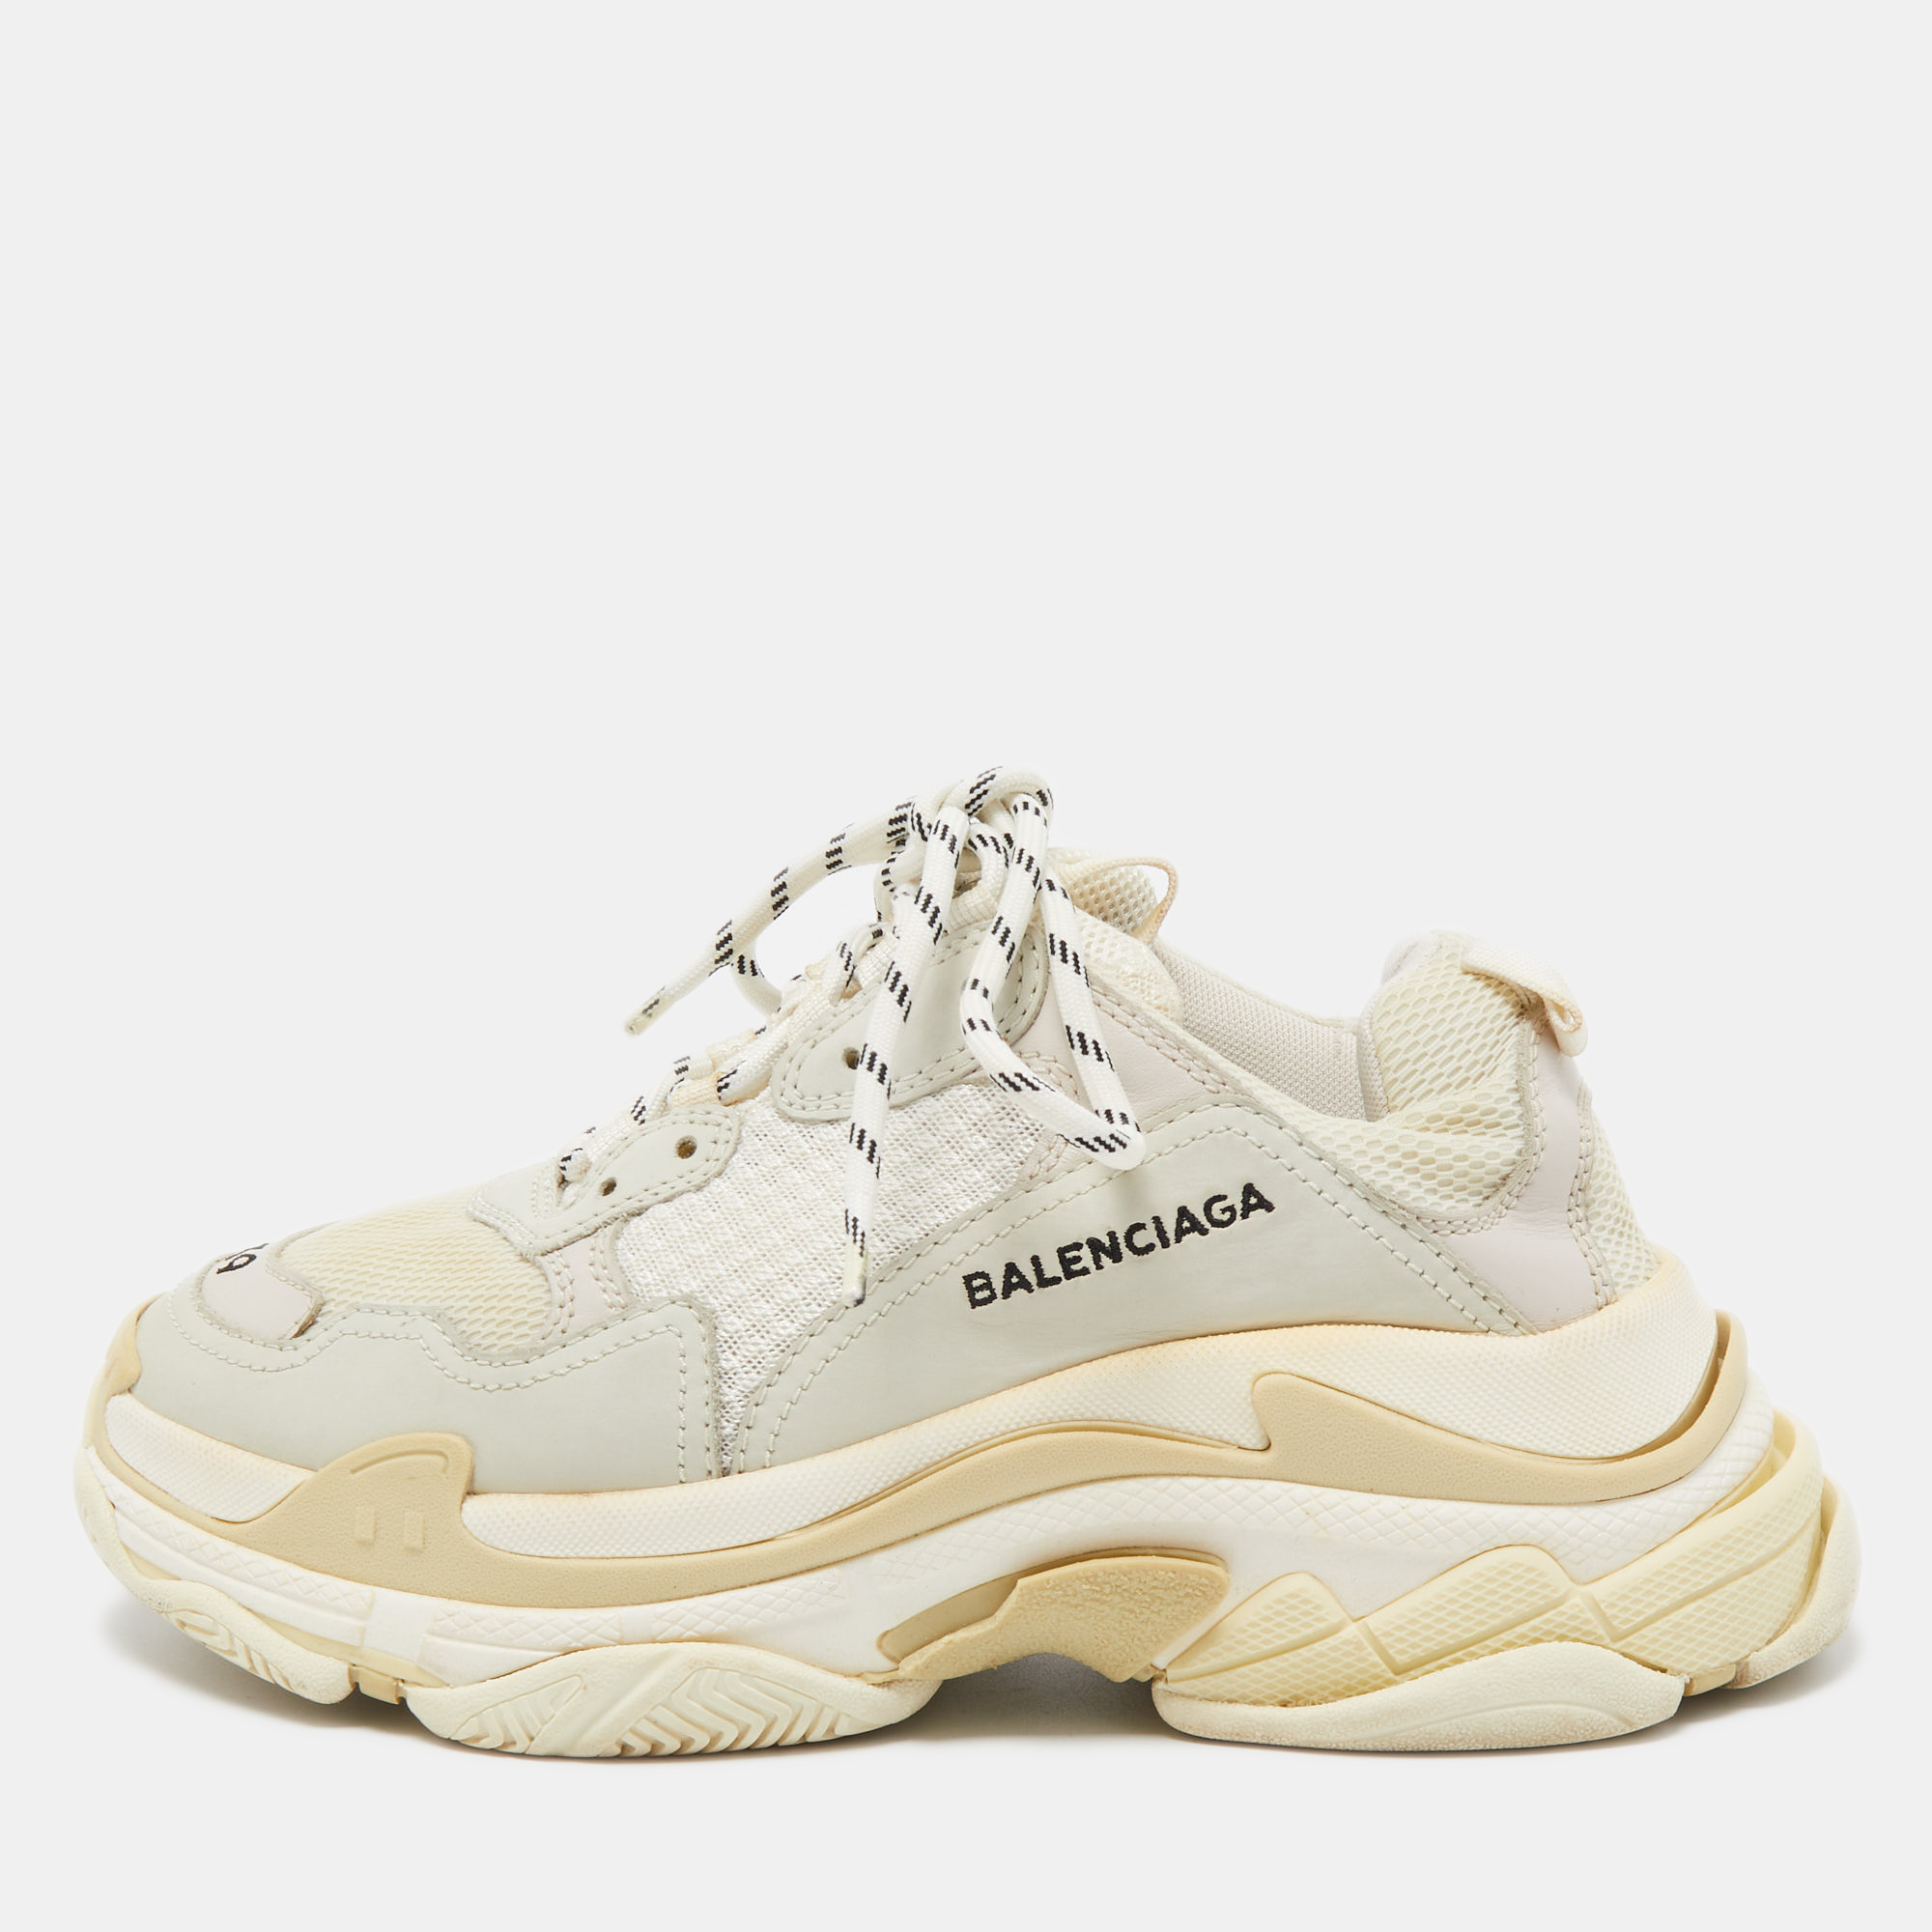 Pre-owned Balenciaga White/grey Mesh And Nubuck Leather Triple S Sneakers Size 39